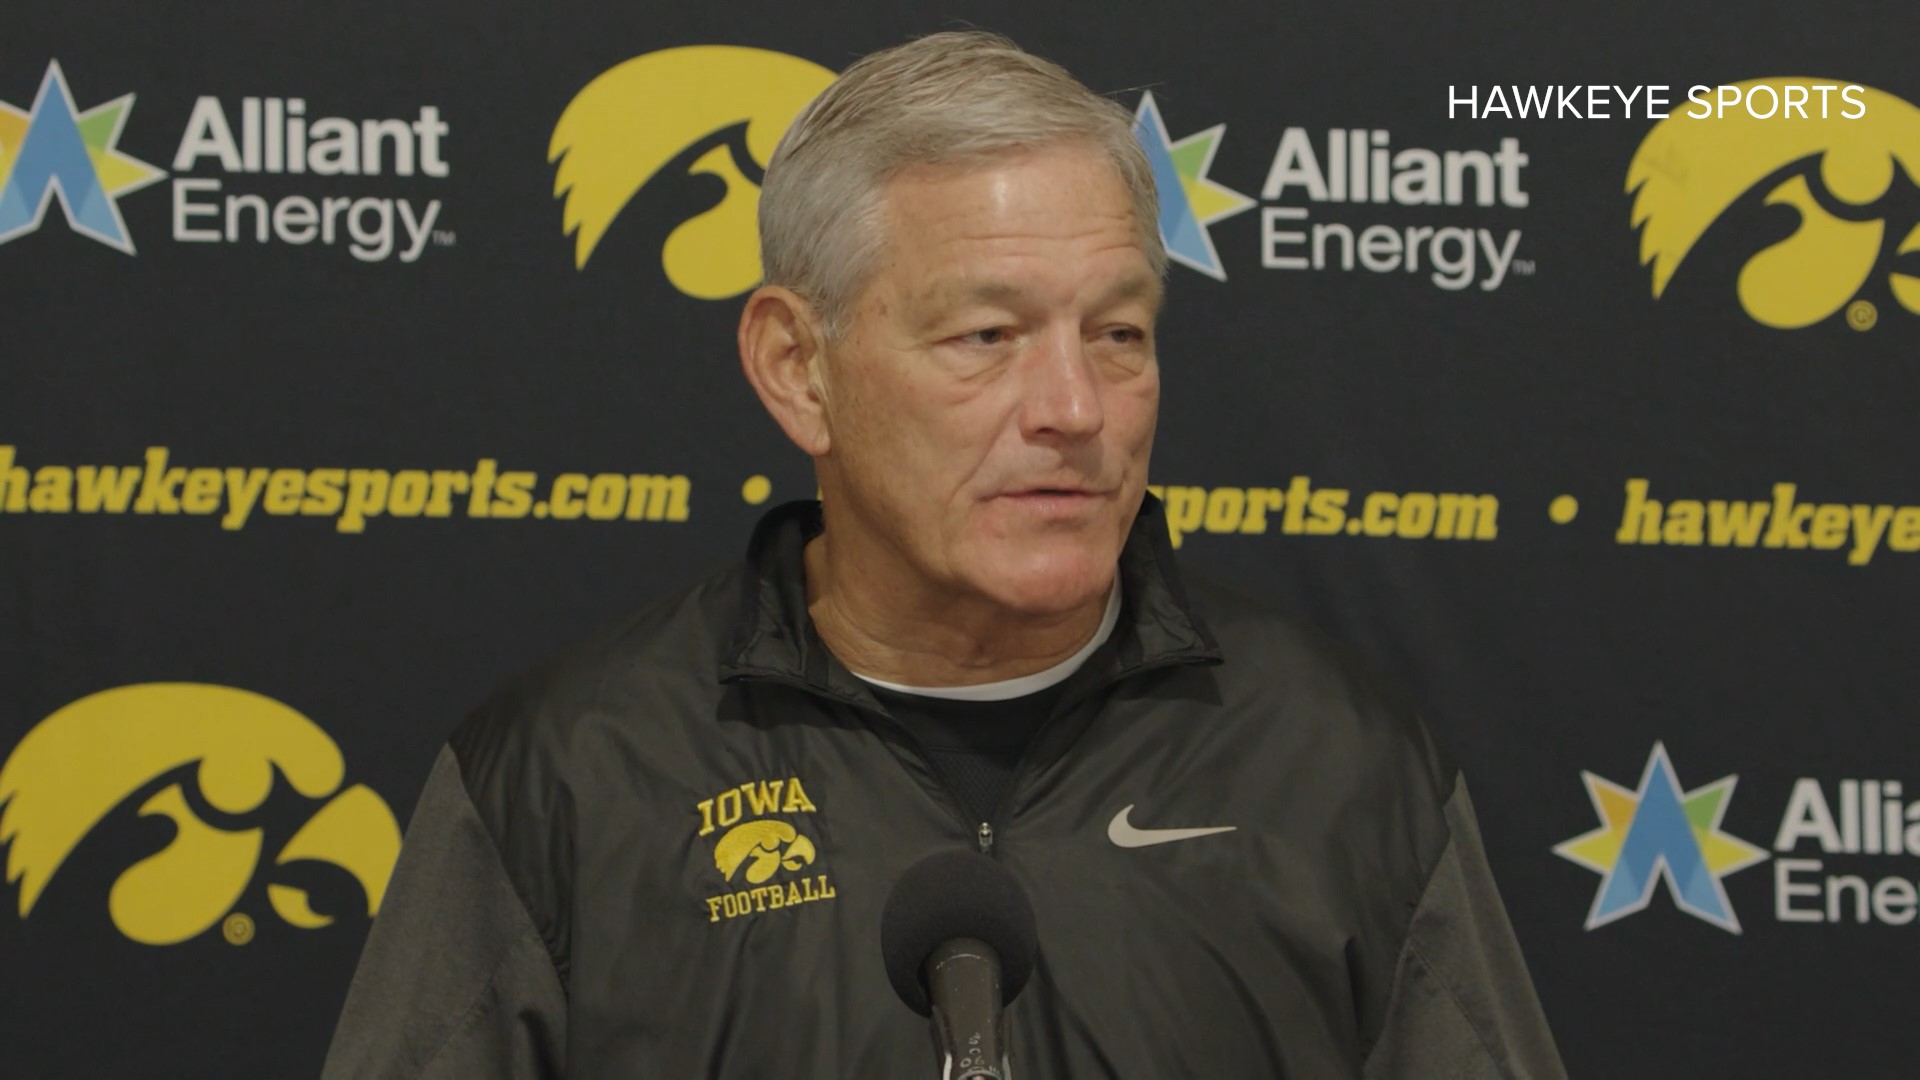 The Iowa Hawkeyes are on a two-game winning streak in Big Ten play after dominating Purdue on the road.